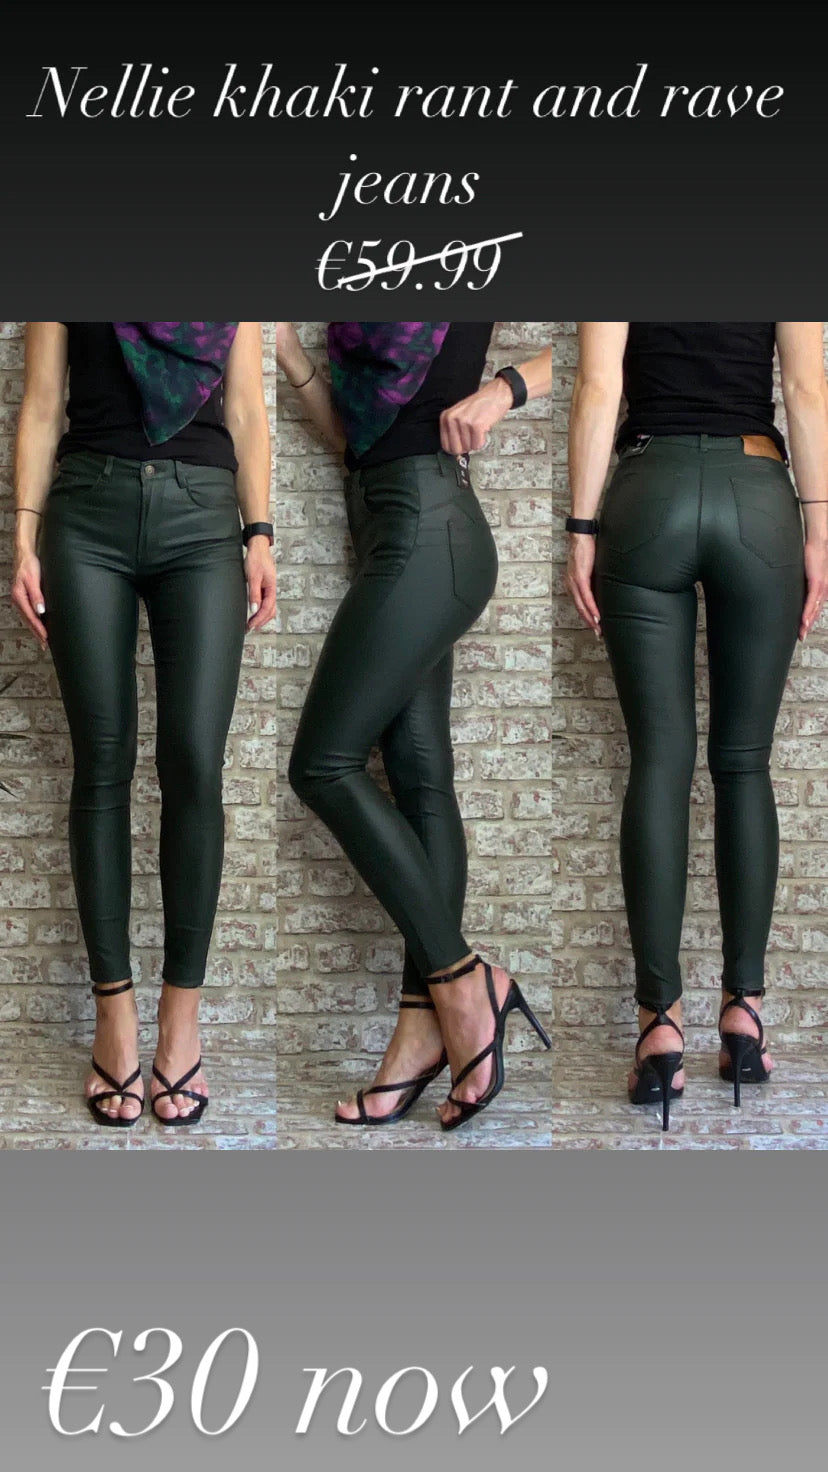 Nellie khaki rant and rave jeans